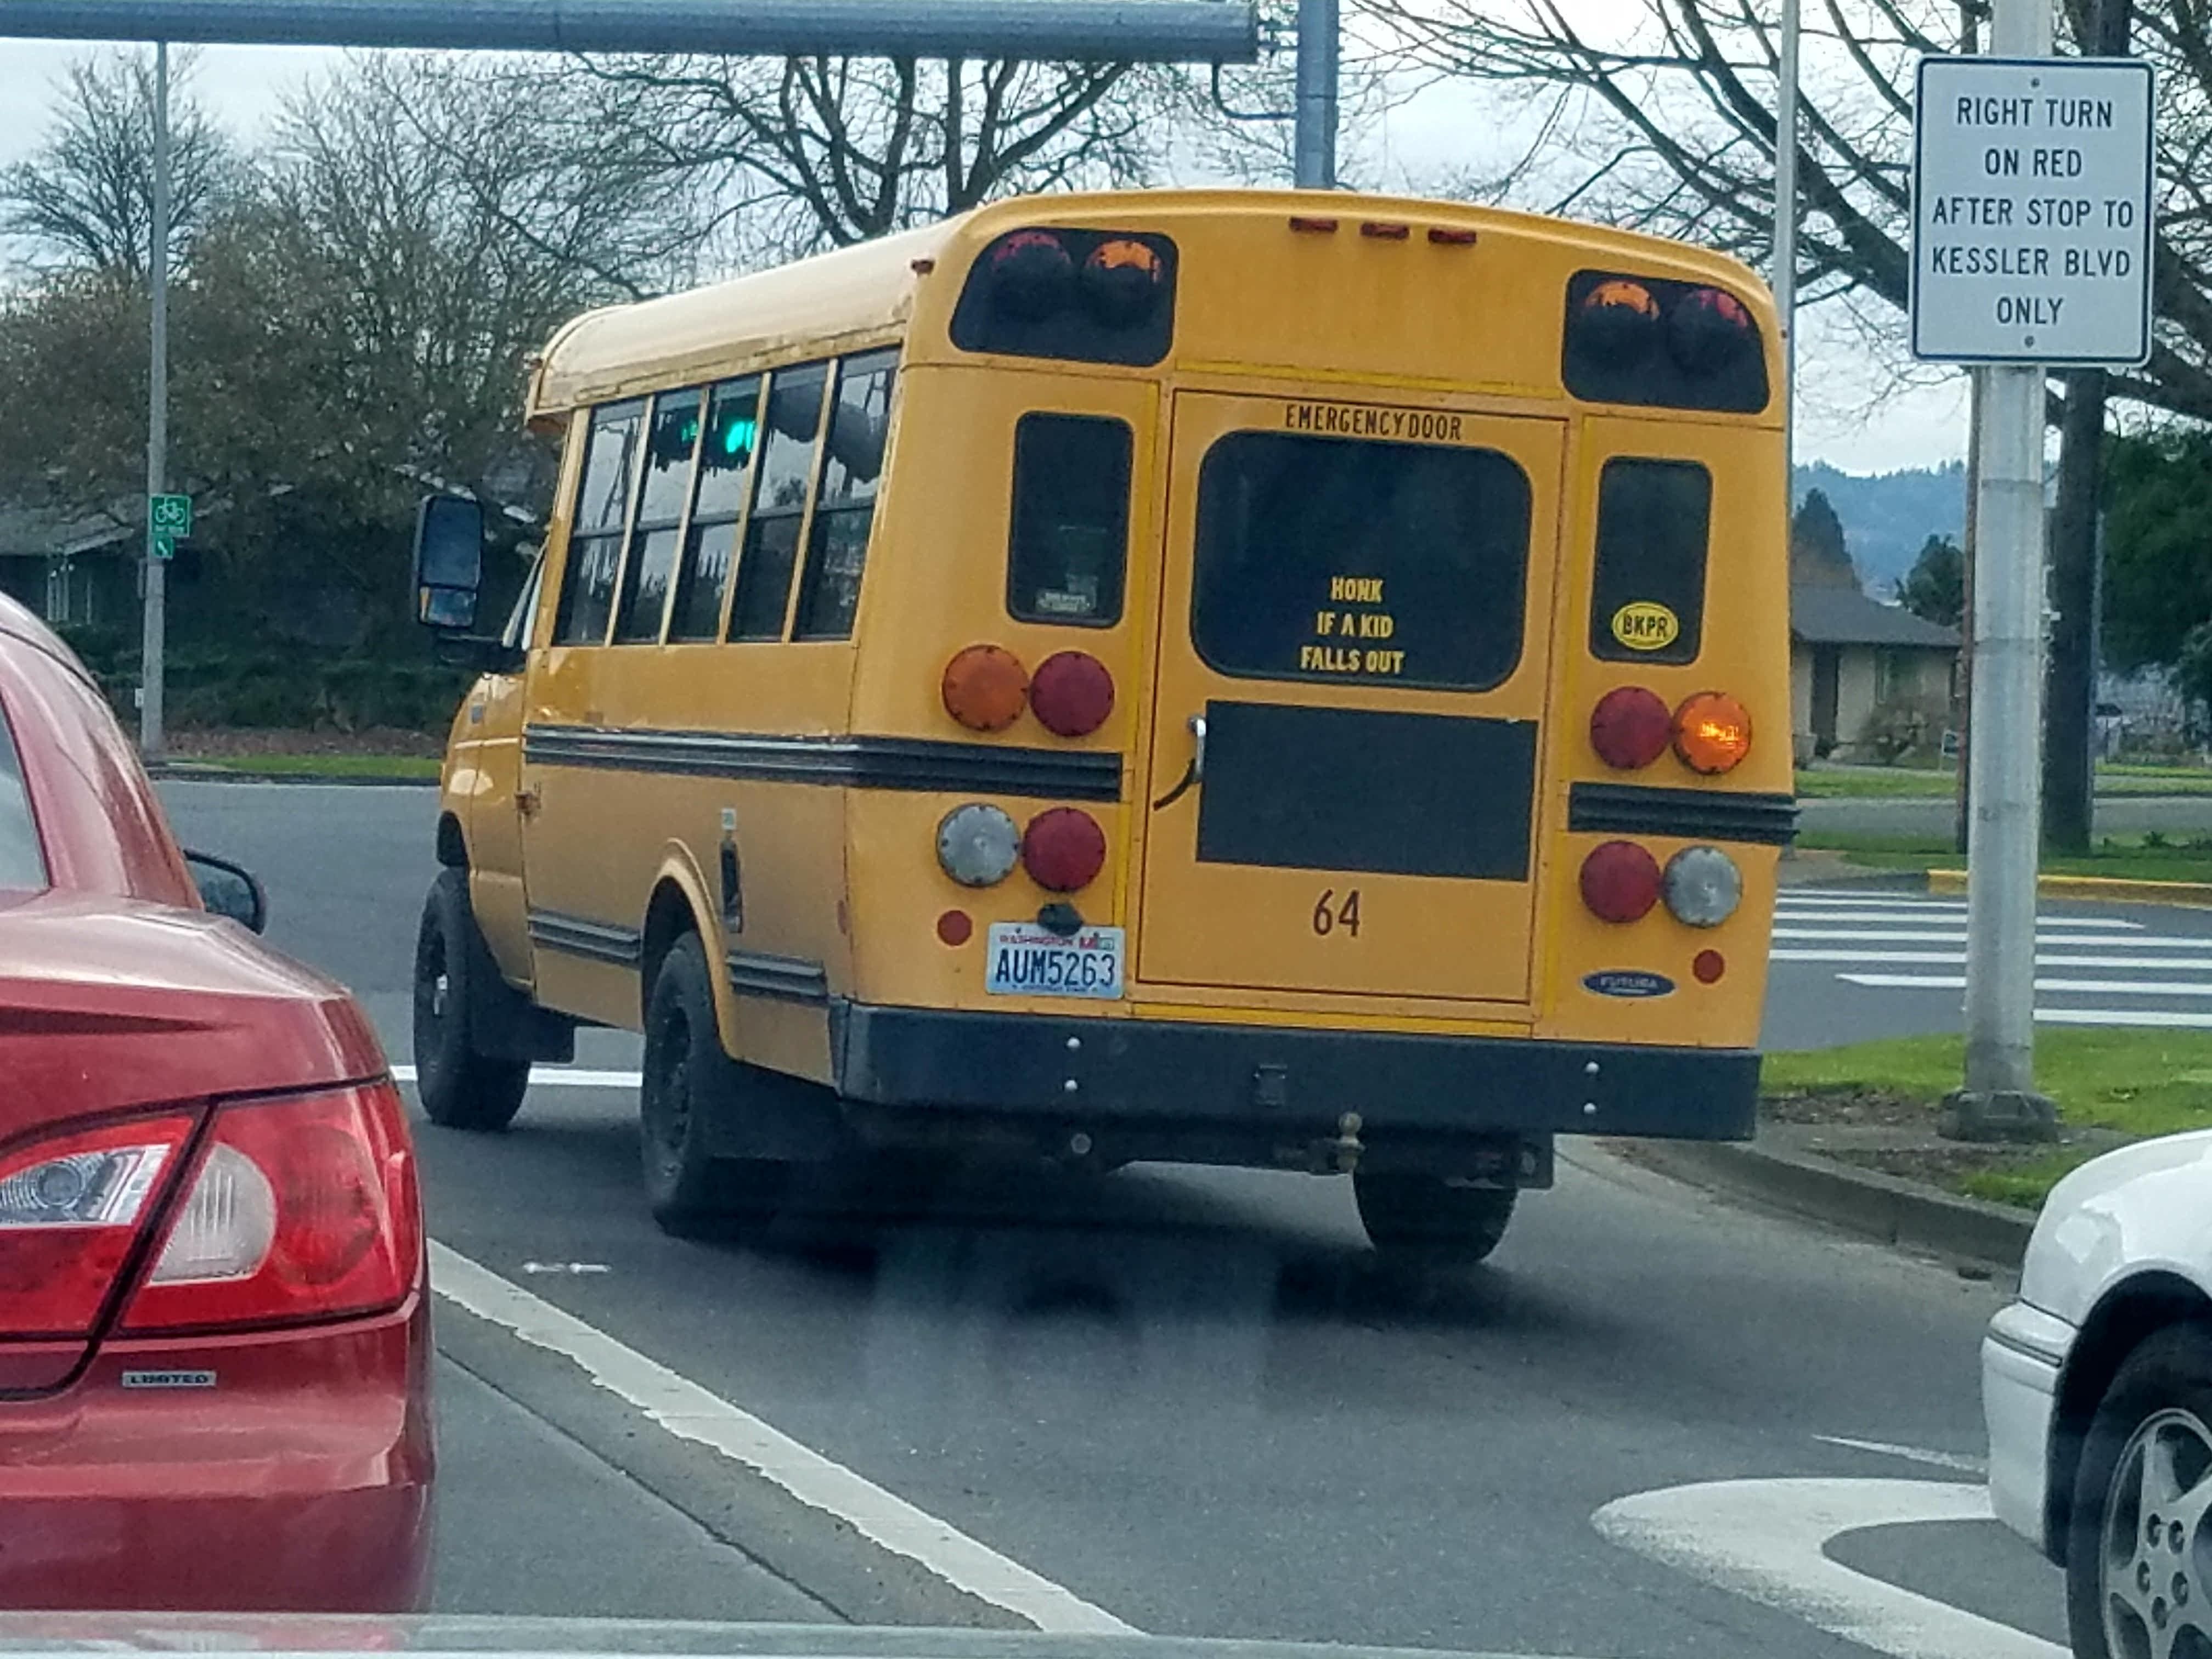 This sticker on the back of this school bus I saw today.